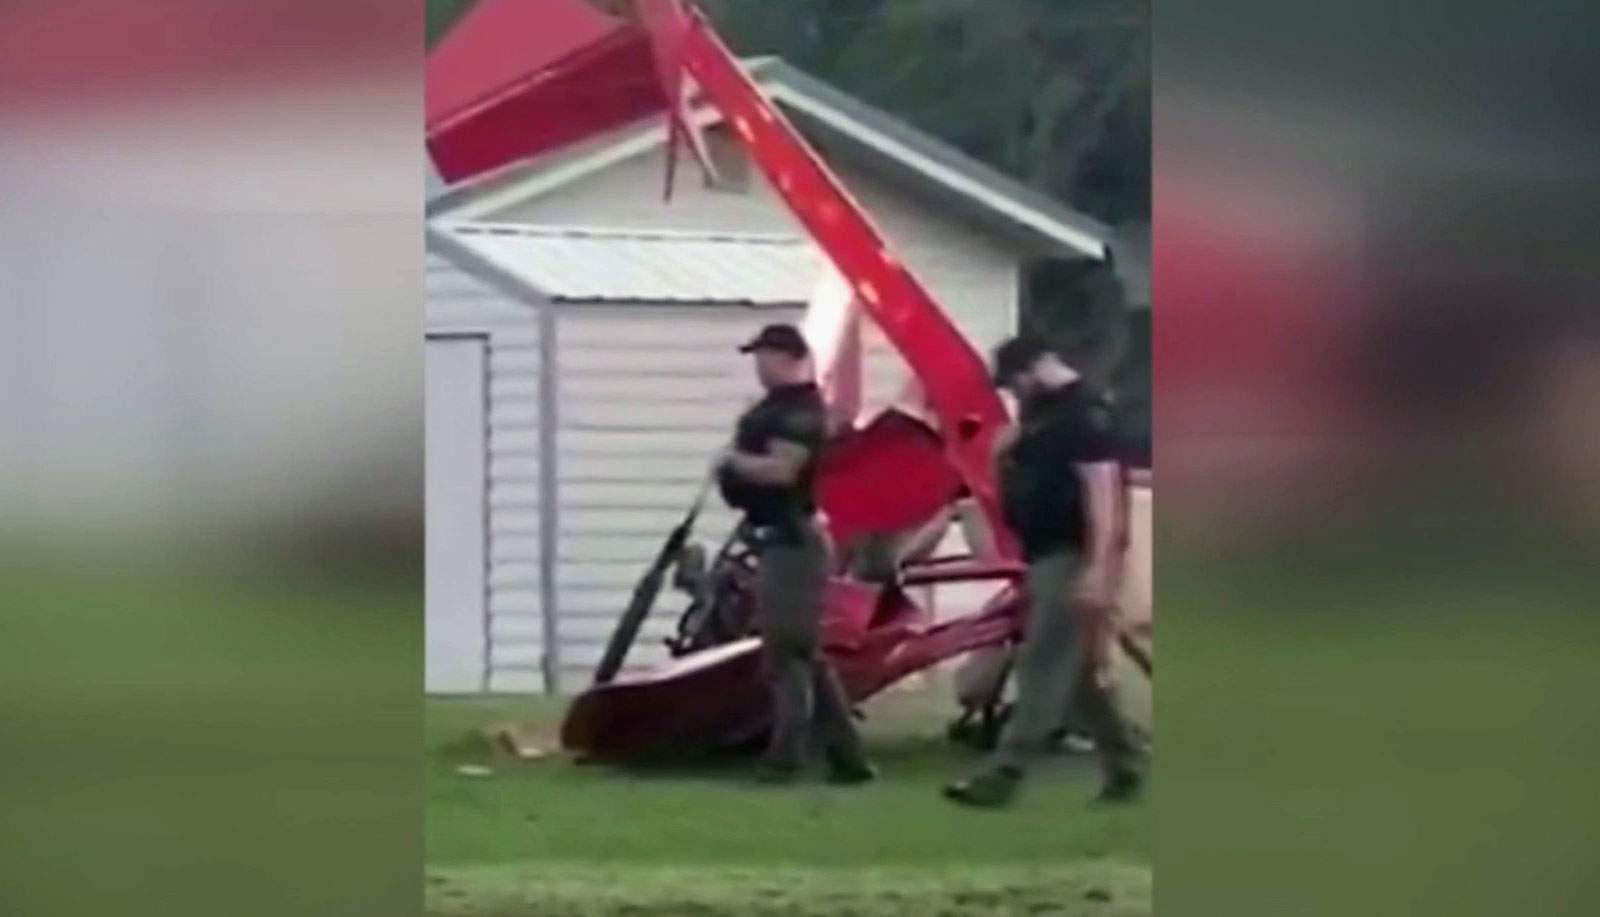 Pilot hospitalized after homemade aircraft crashes in Florida